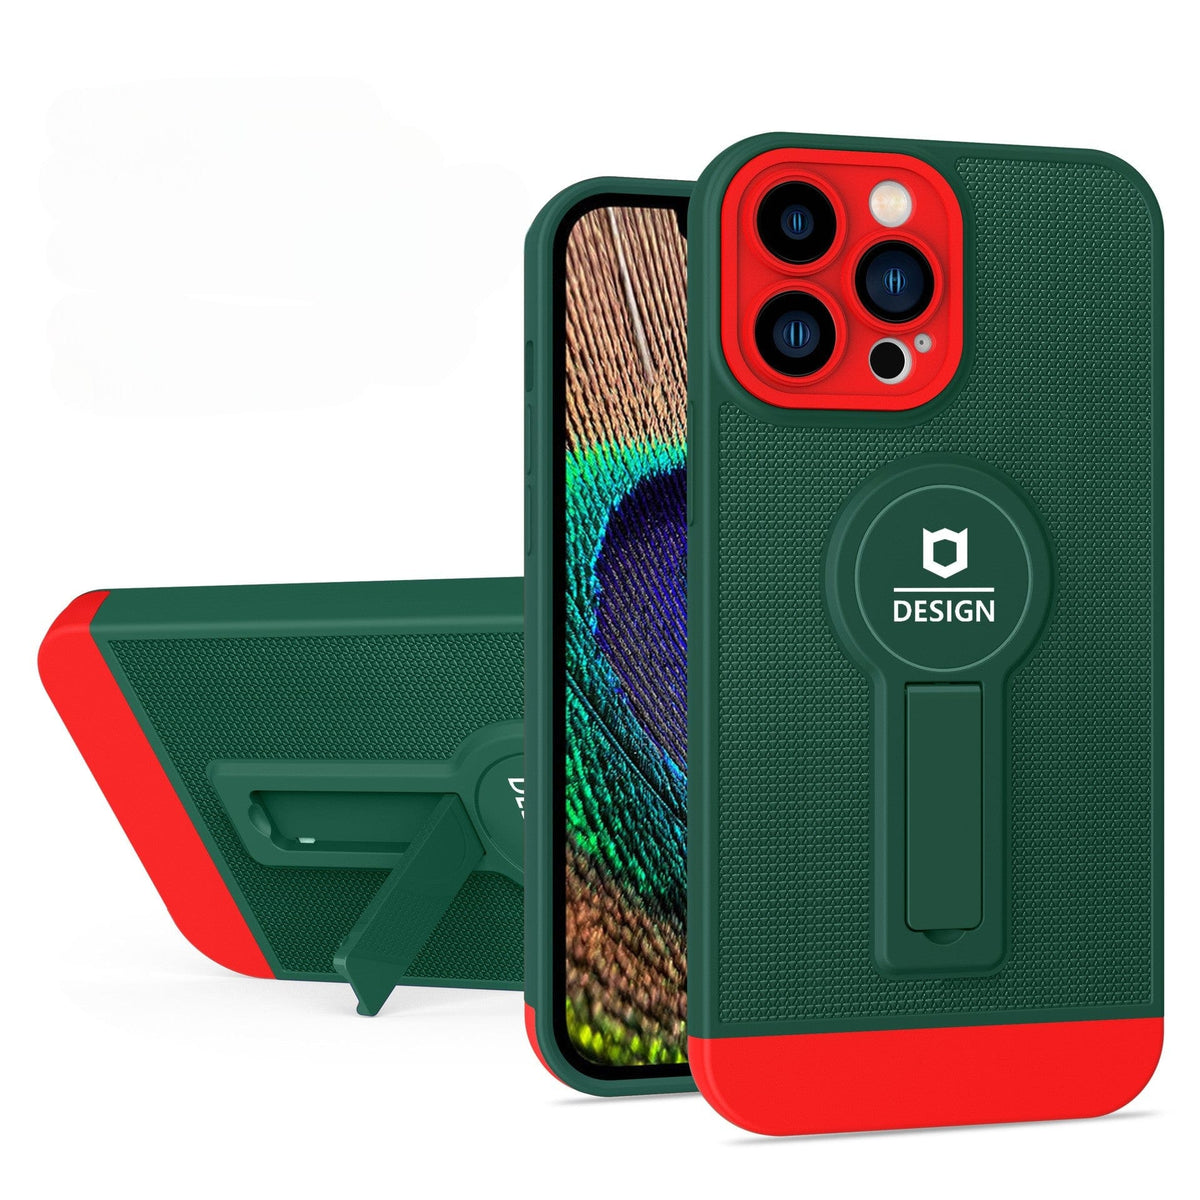 HUSA ARMOR DESIGN CU STAND PENTRU SAMSUNG GALAXY A02S/ A03S, VERDE/ROSU, SUPORT AUTO MAGNETIC, WIRELESS CHARGE, PROTECTIE ANTISOC